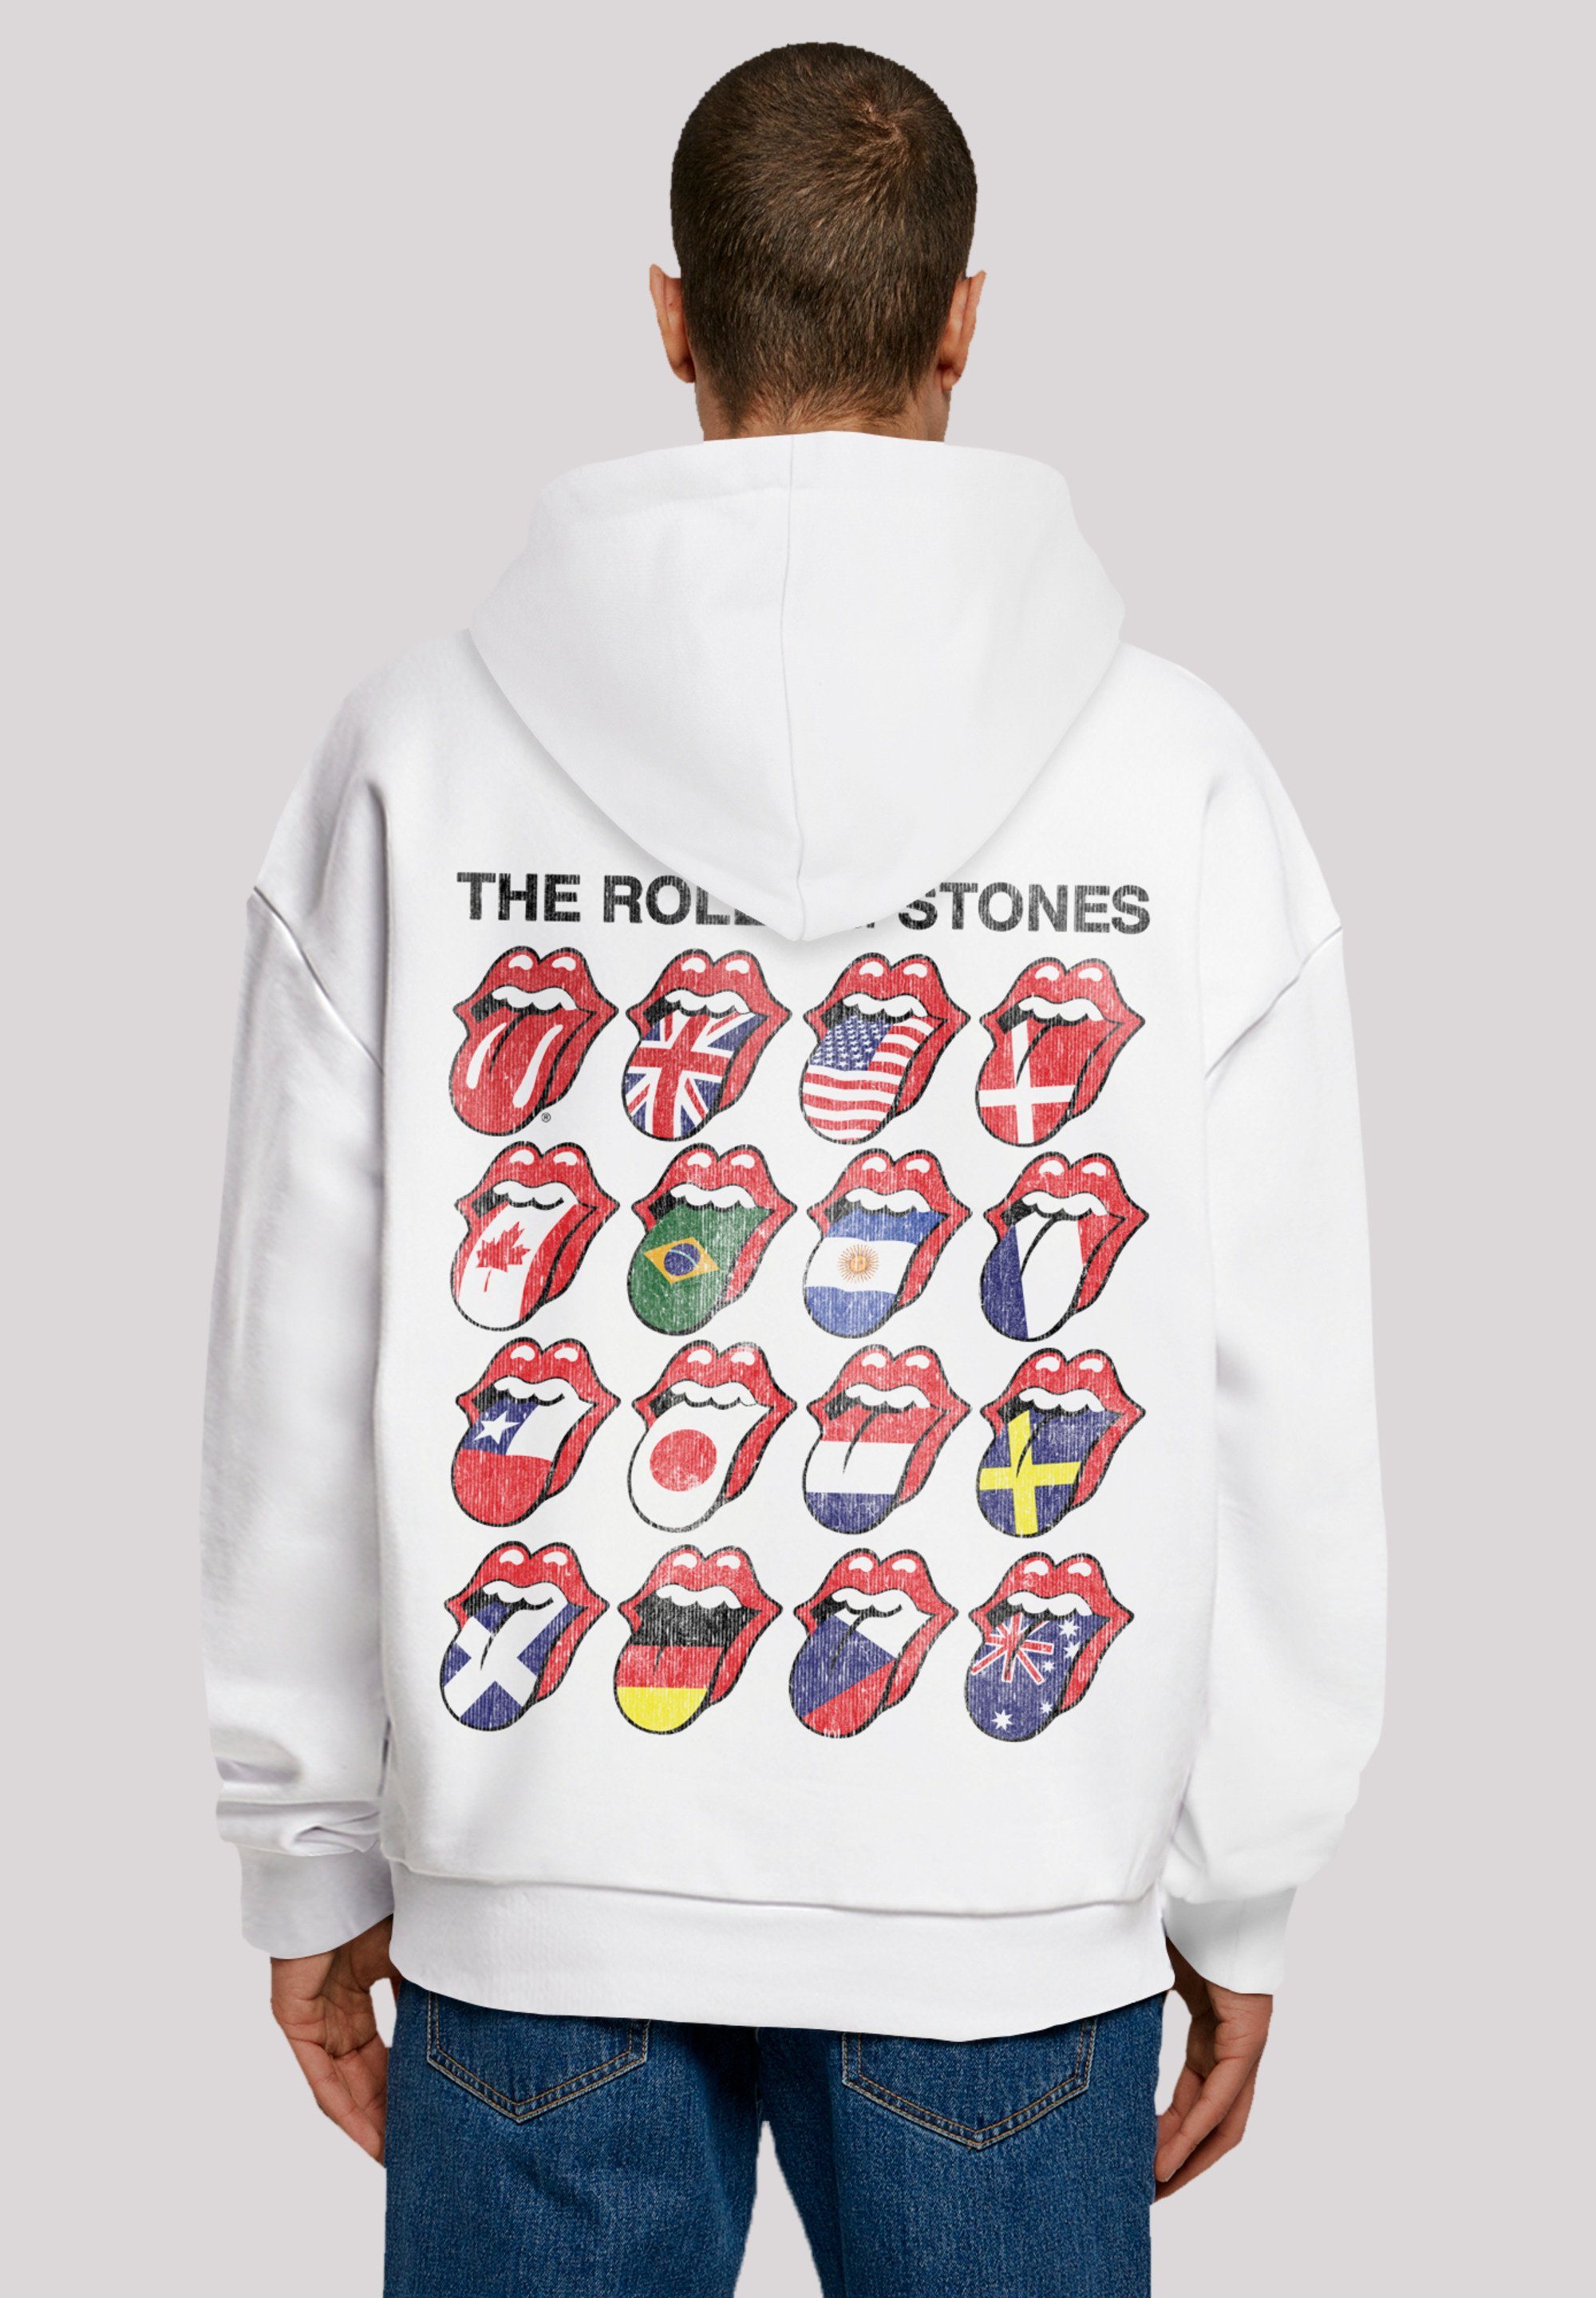 Rolling Lounge Stones Logo, The Musik, Stones Offiziell Rolling lizenzierter Band, Voodoo Hoodie Kapuzenpullover Tongues F4NT4STIC The